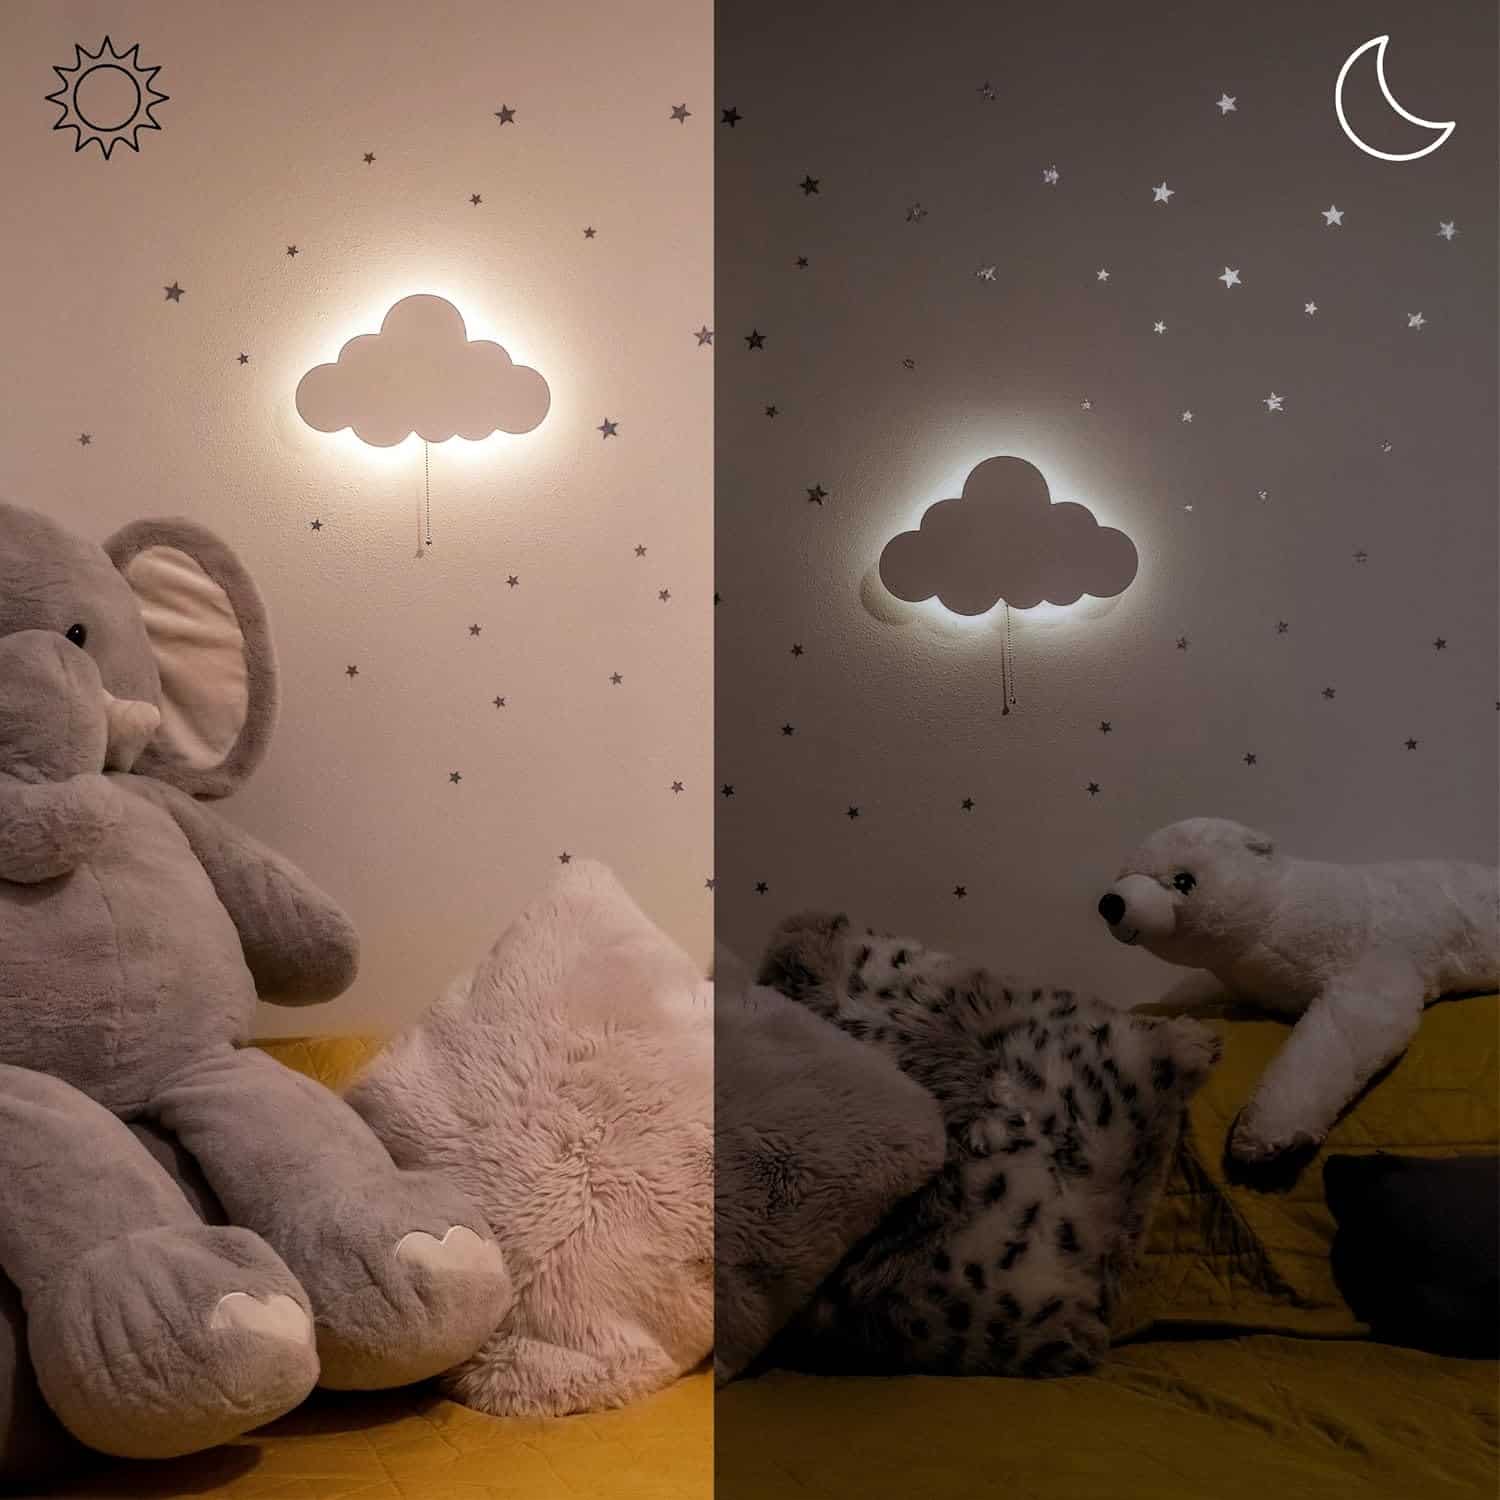 Cloud Light - Floating Cloud Wall Lamp For Nursery | Cute Floating Cloud Lamp For Kids Bedroom | Battery-operated Hanging Cloud Night Lights | Cloud Lights For Bedroom | Cloud Lamp For Baby Nursery